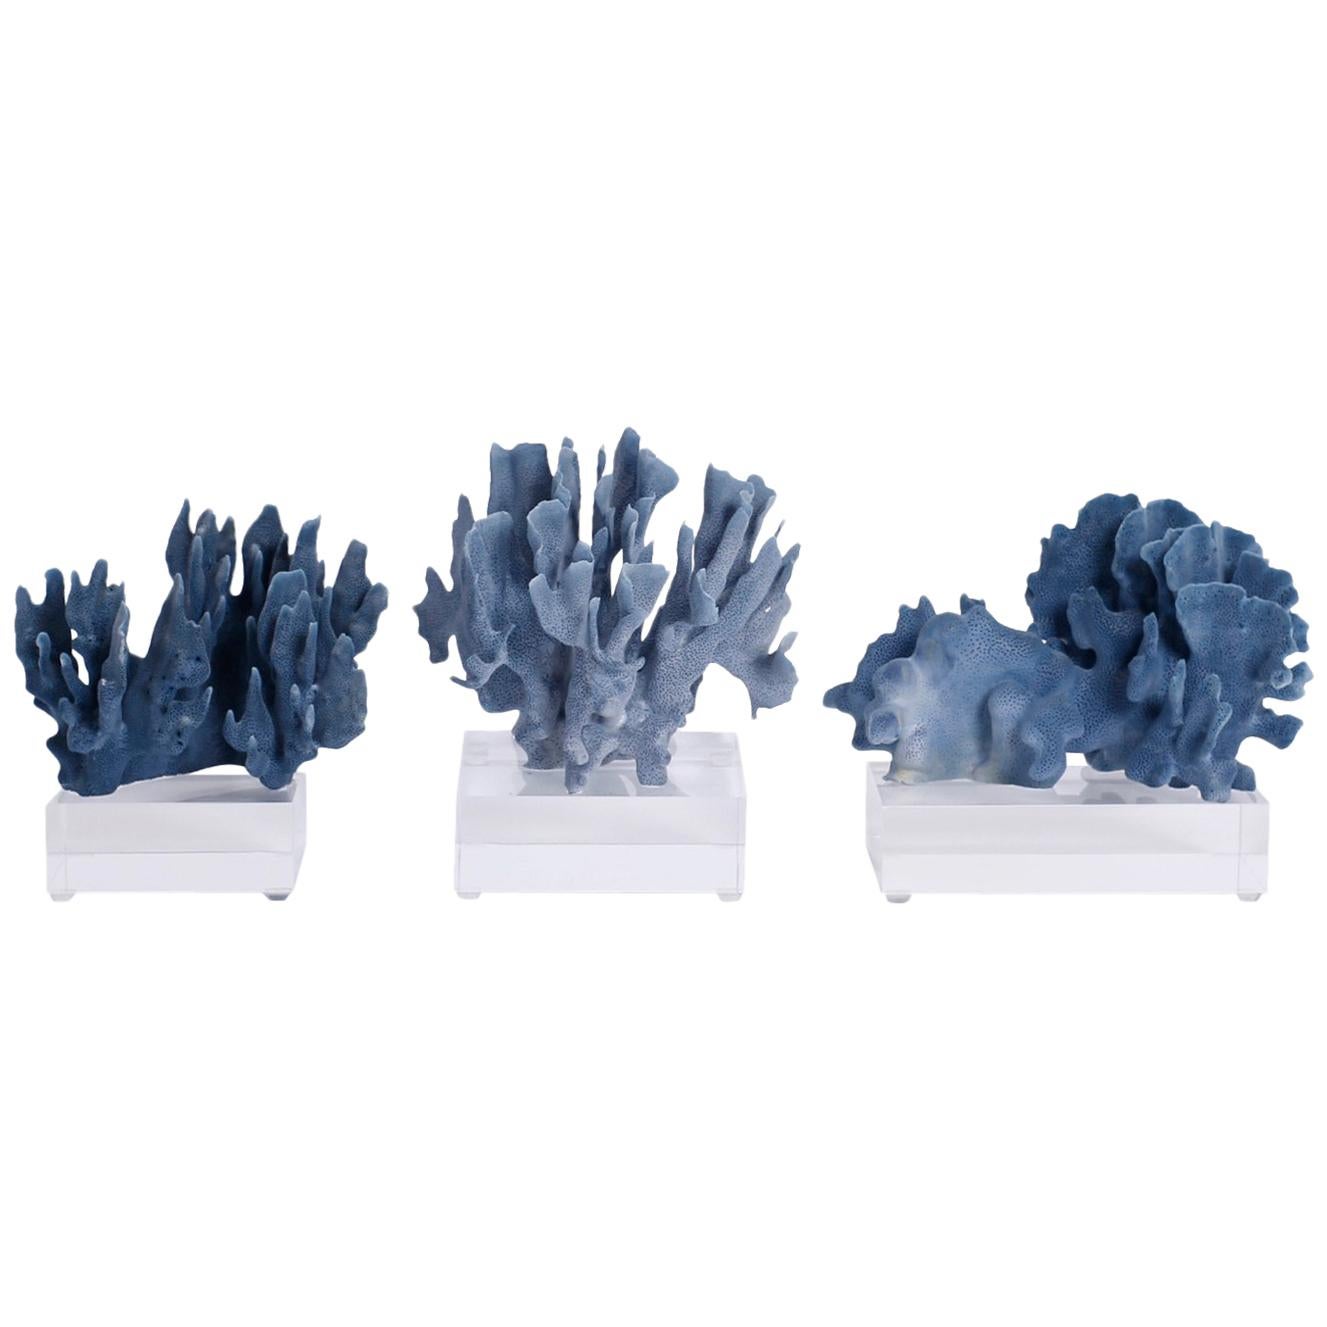 Blue Coral Sculptures on Lucite, Priced Individually